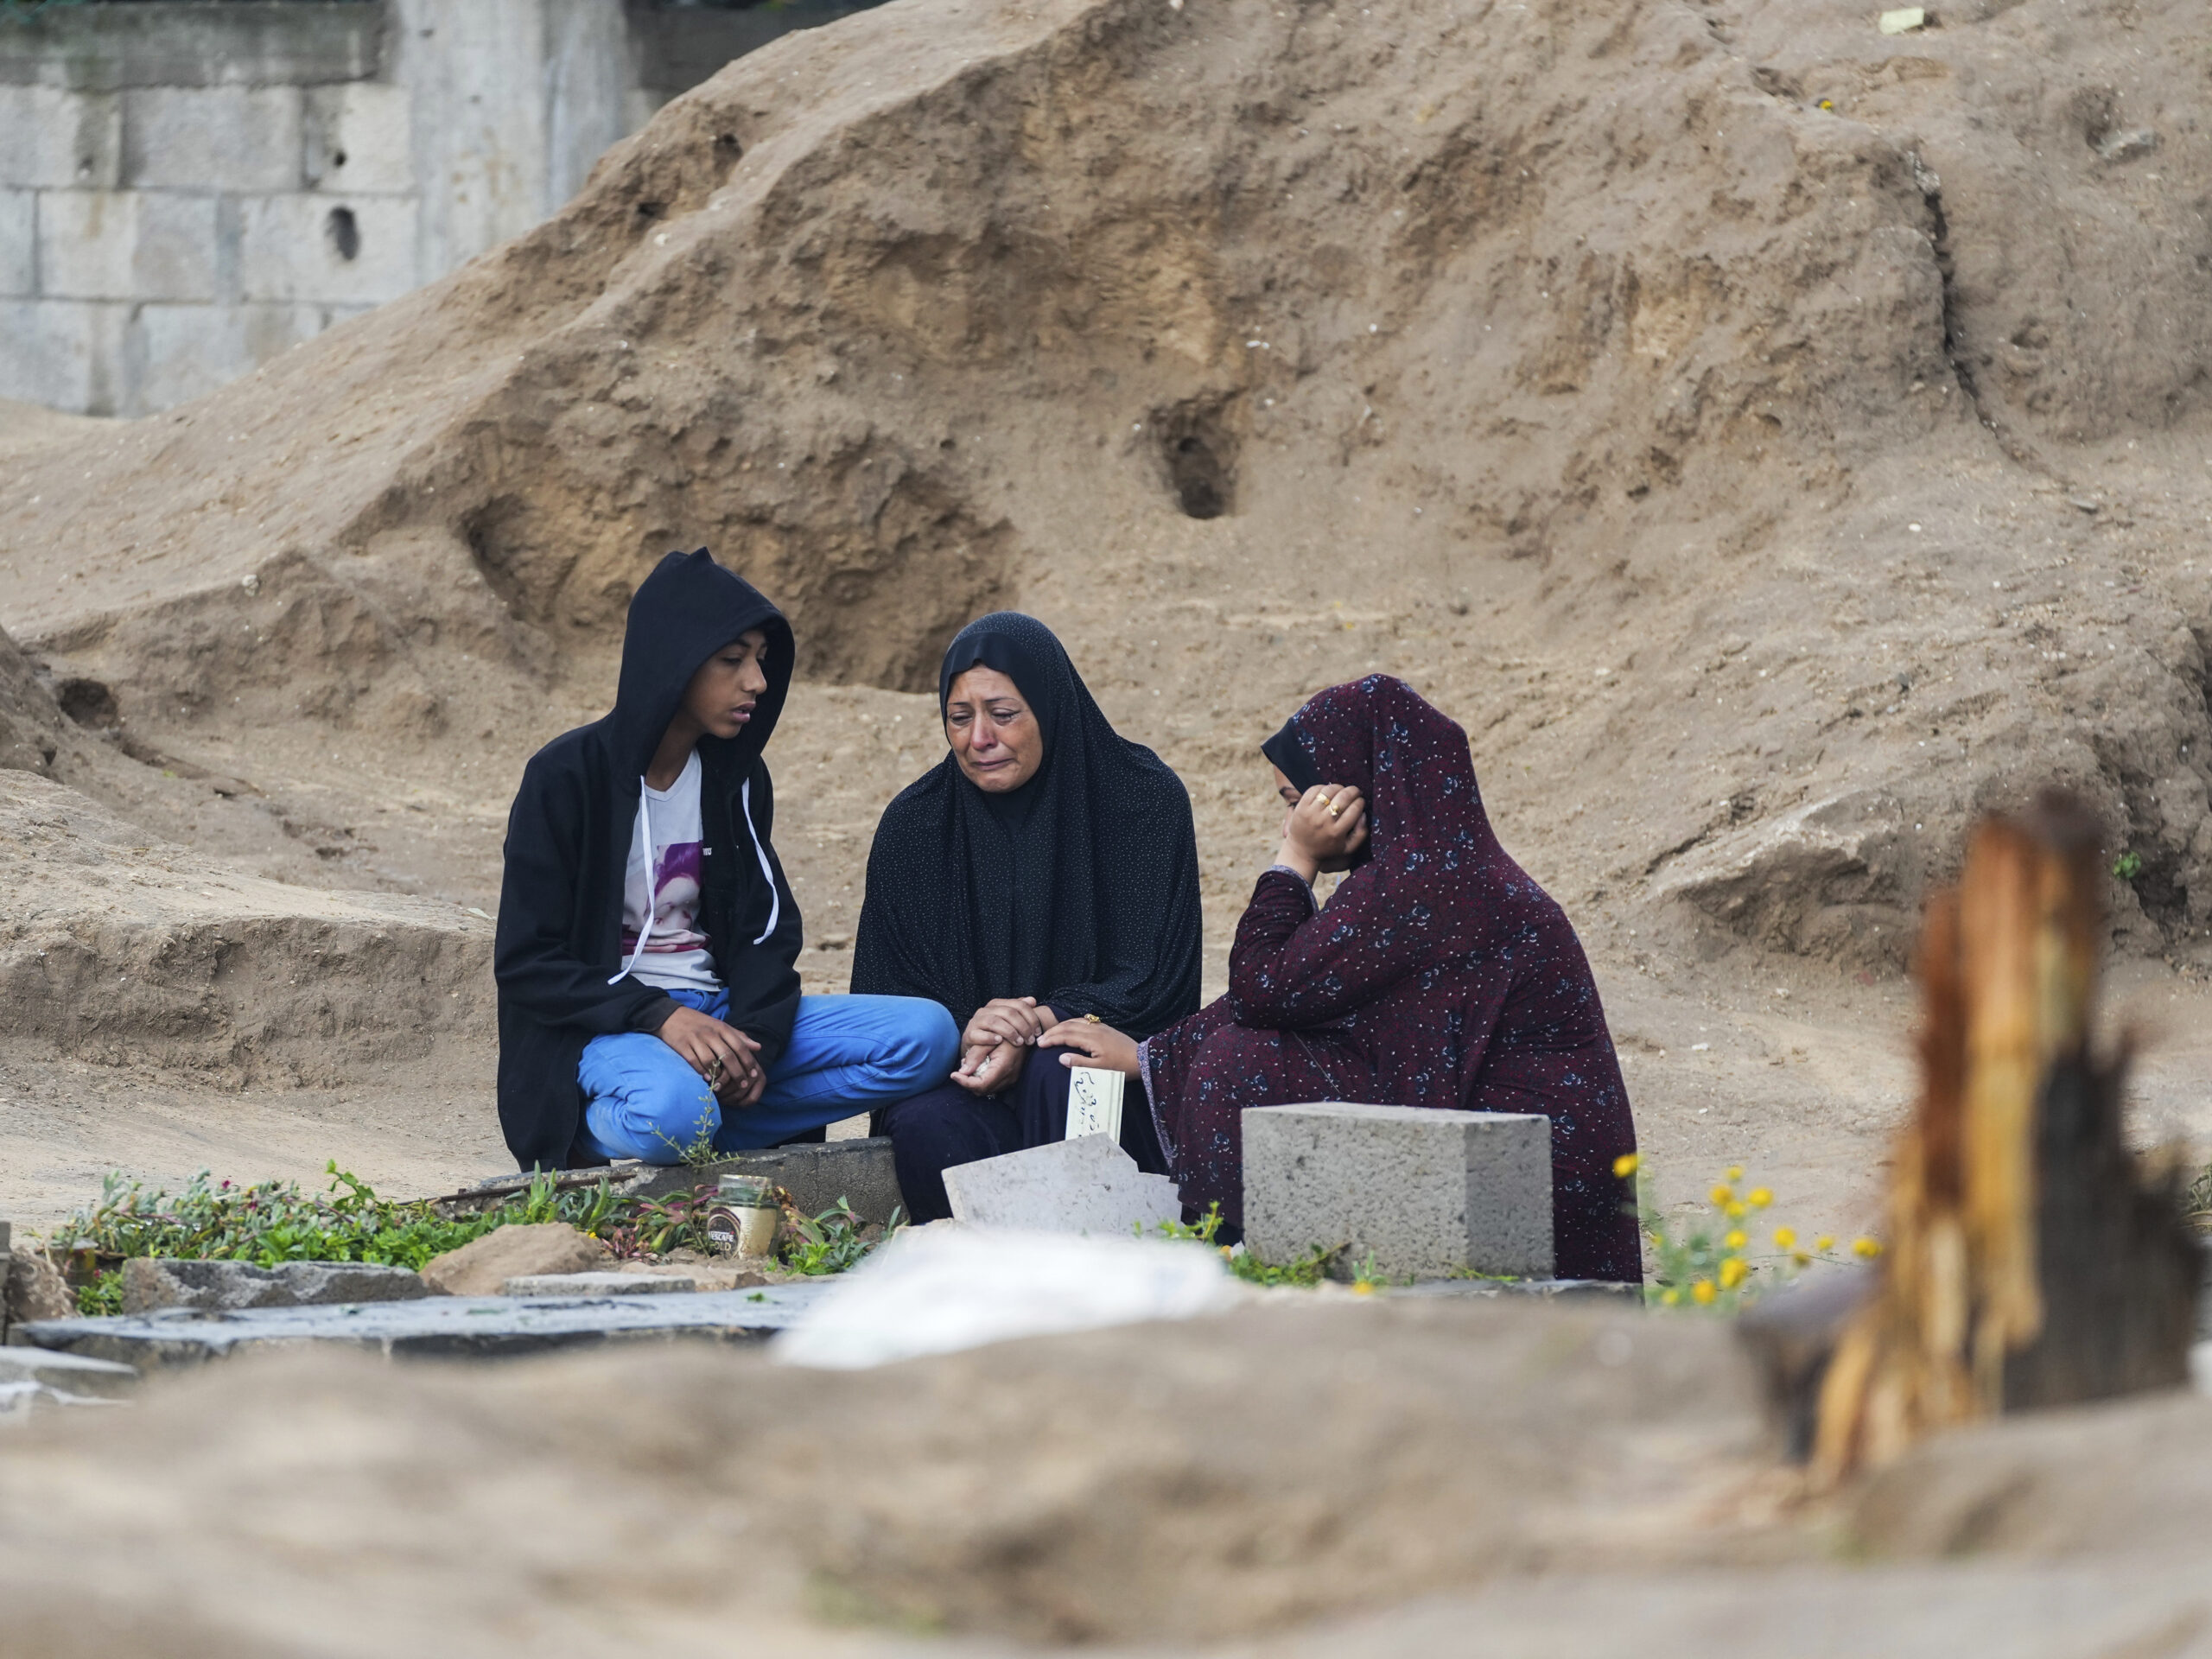 Palestinians visit the graves of  relatives killed in the war between Israel and Hamas. The cemetery is in the central Gaza town of Deir al-Balah. Wednesday marked the first day of the Muslim holiday of Eid al-Fitr, but it was a somber day throughout Gaza.